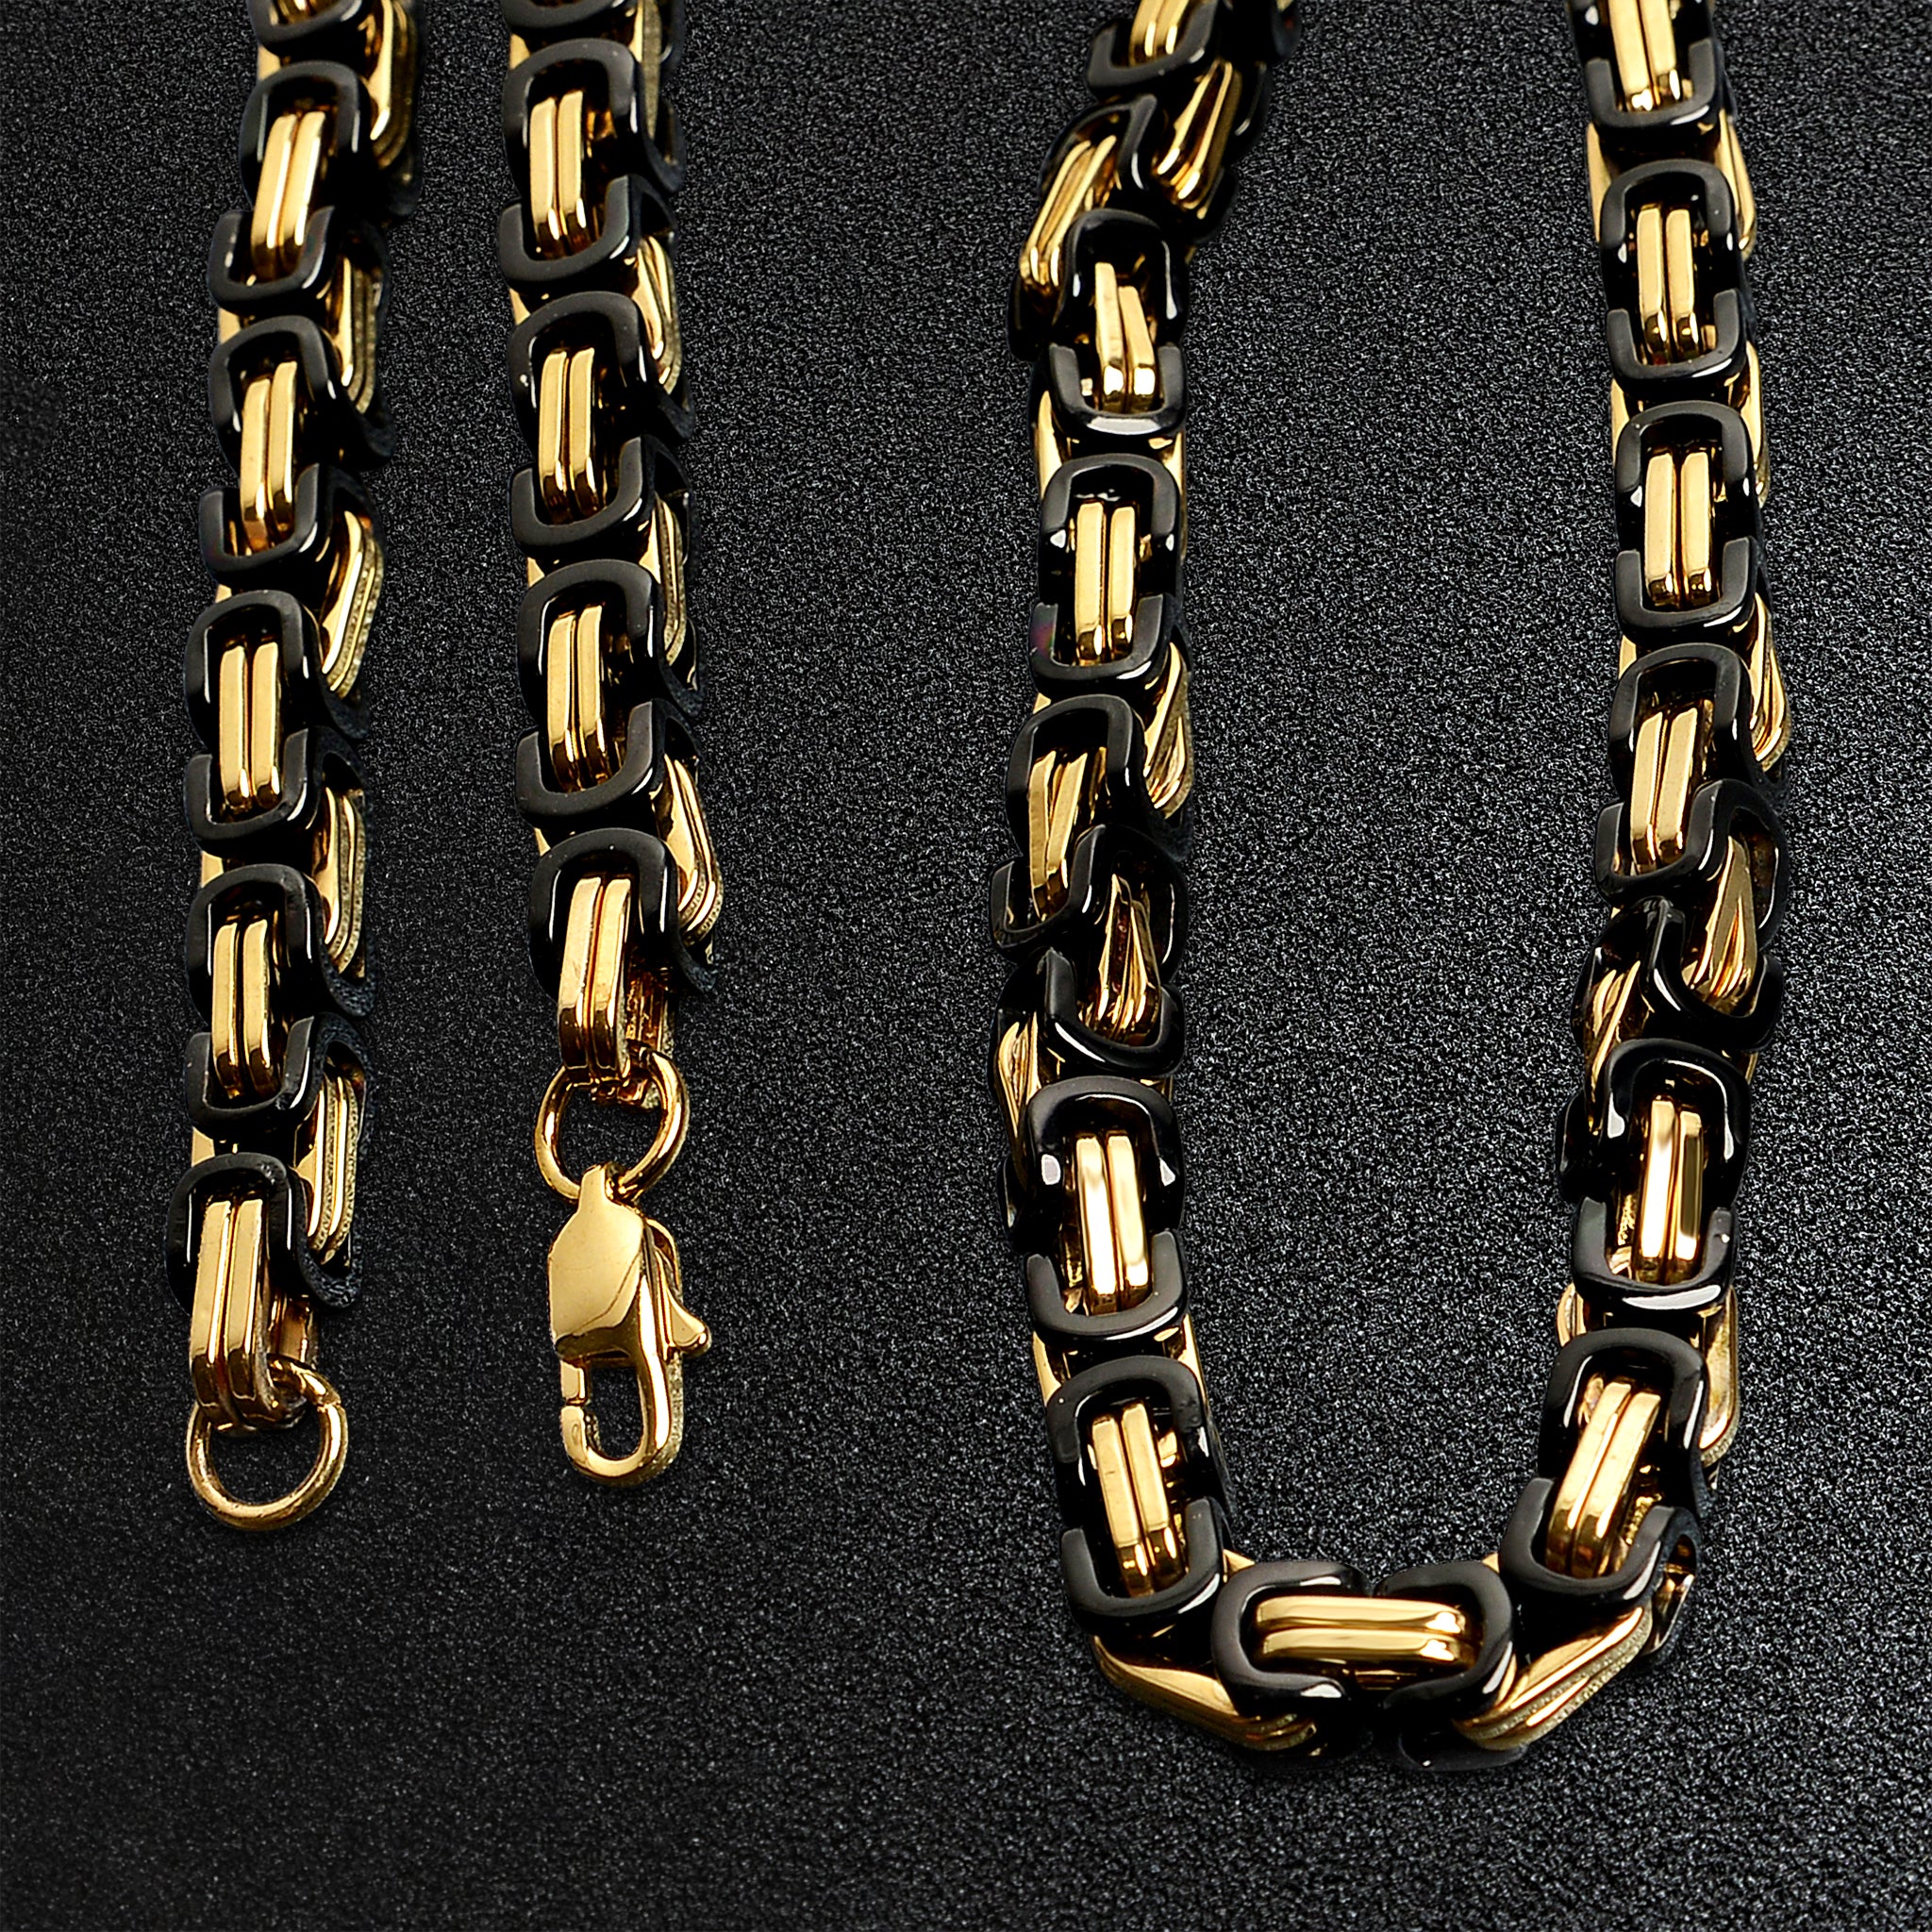 JEWELRY VENDOR - Wholesale 18K Gold Plated Chains for Jewelry